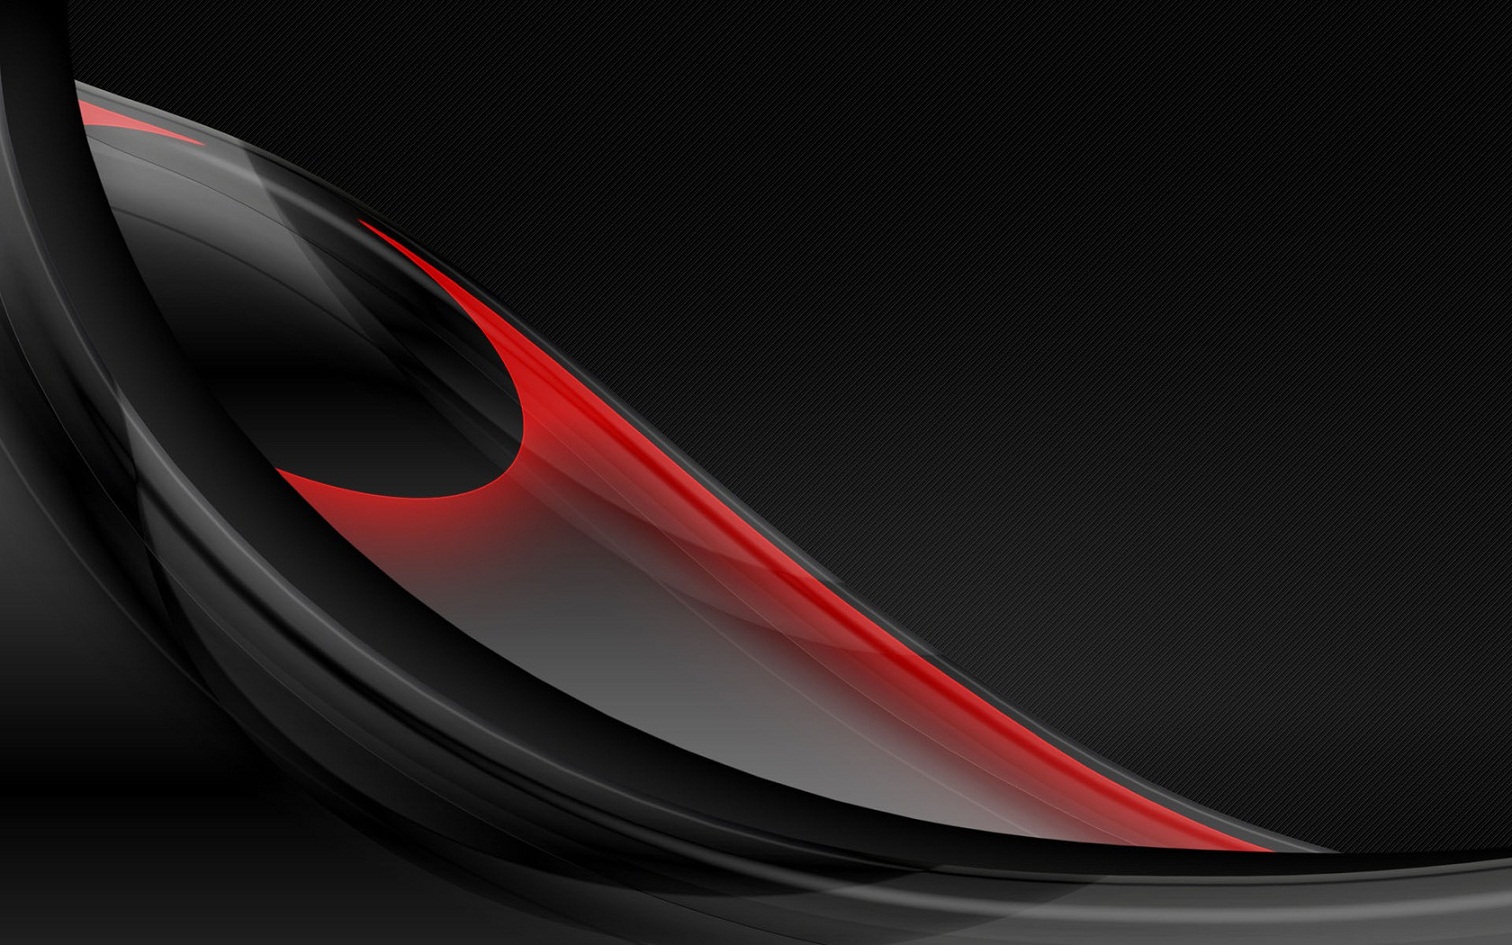 Abstract Black Red Shapes Free PPT Backgrounds for your PowerPoint